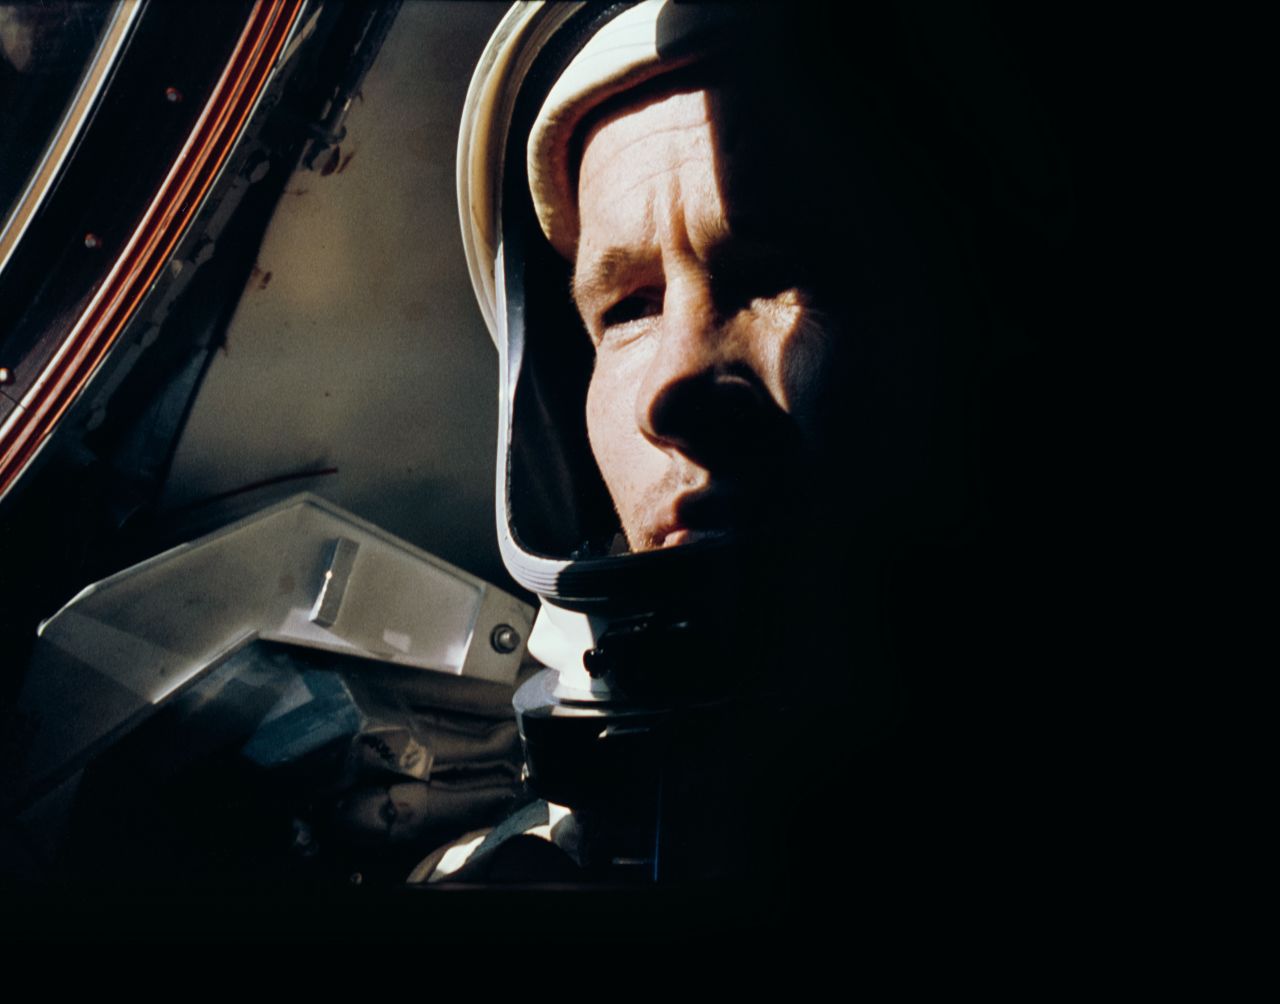 Astronaut Ed White, photographed by commander Jim McDivitt, in June 1965 aboard Gemini 4, NASA's first spacewalk mission.